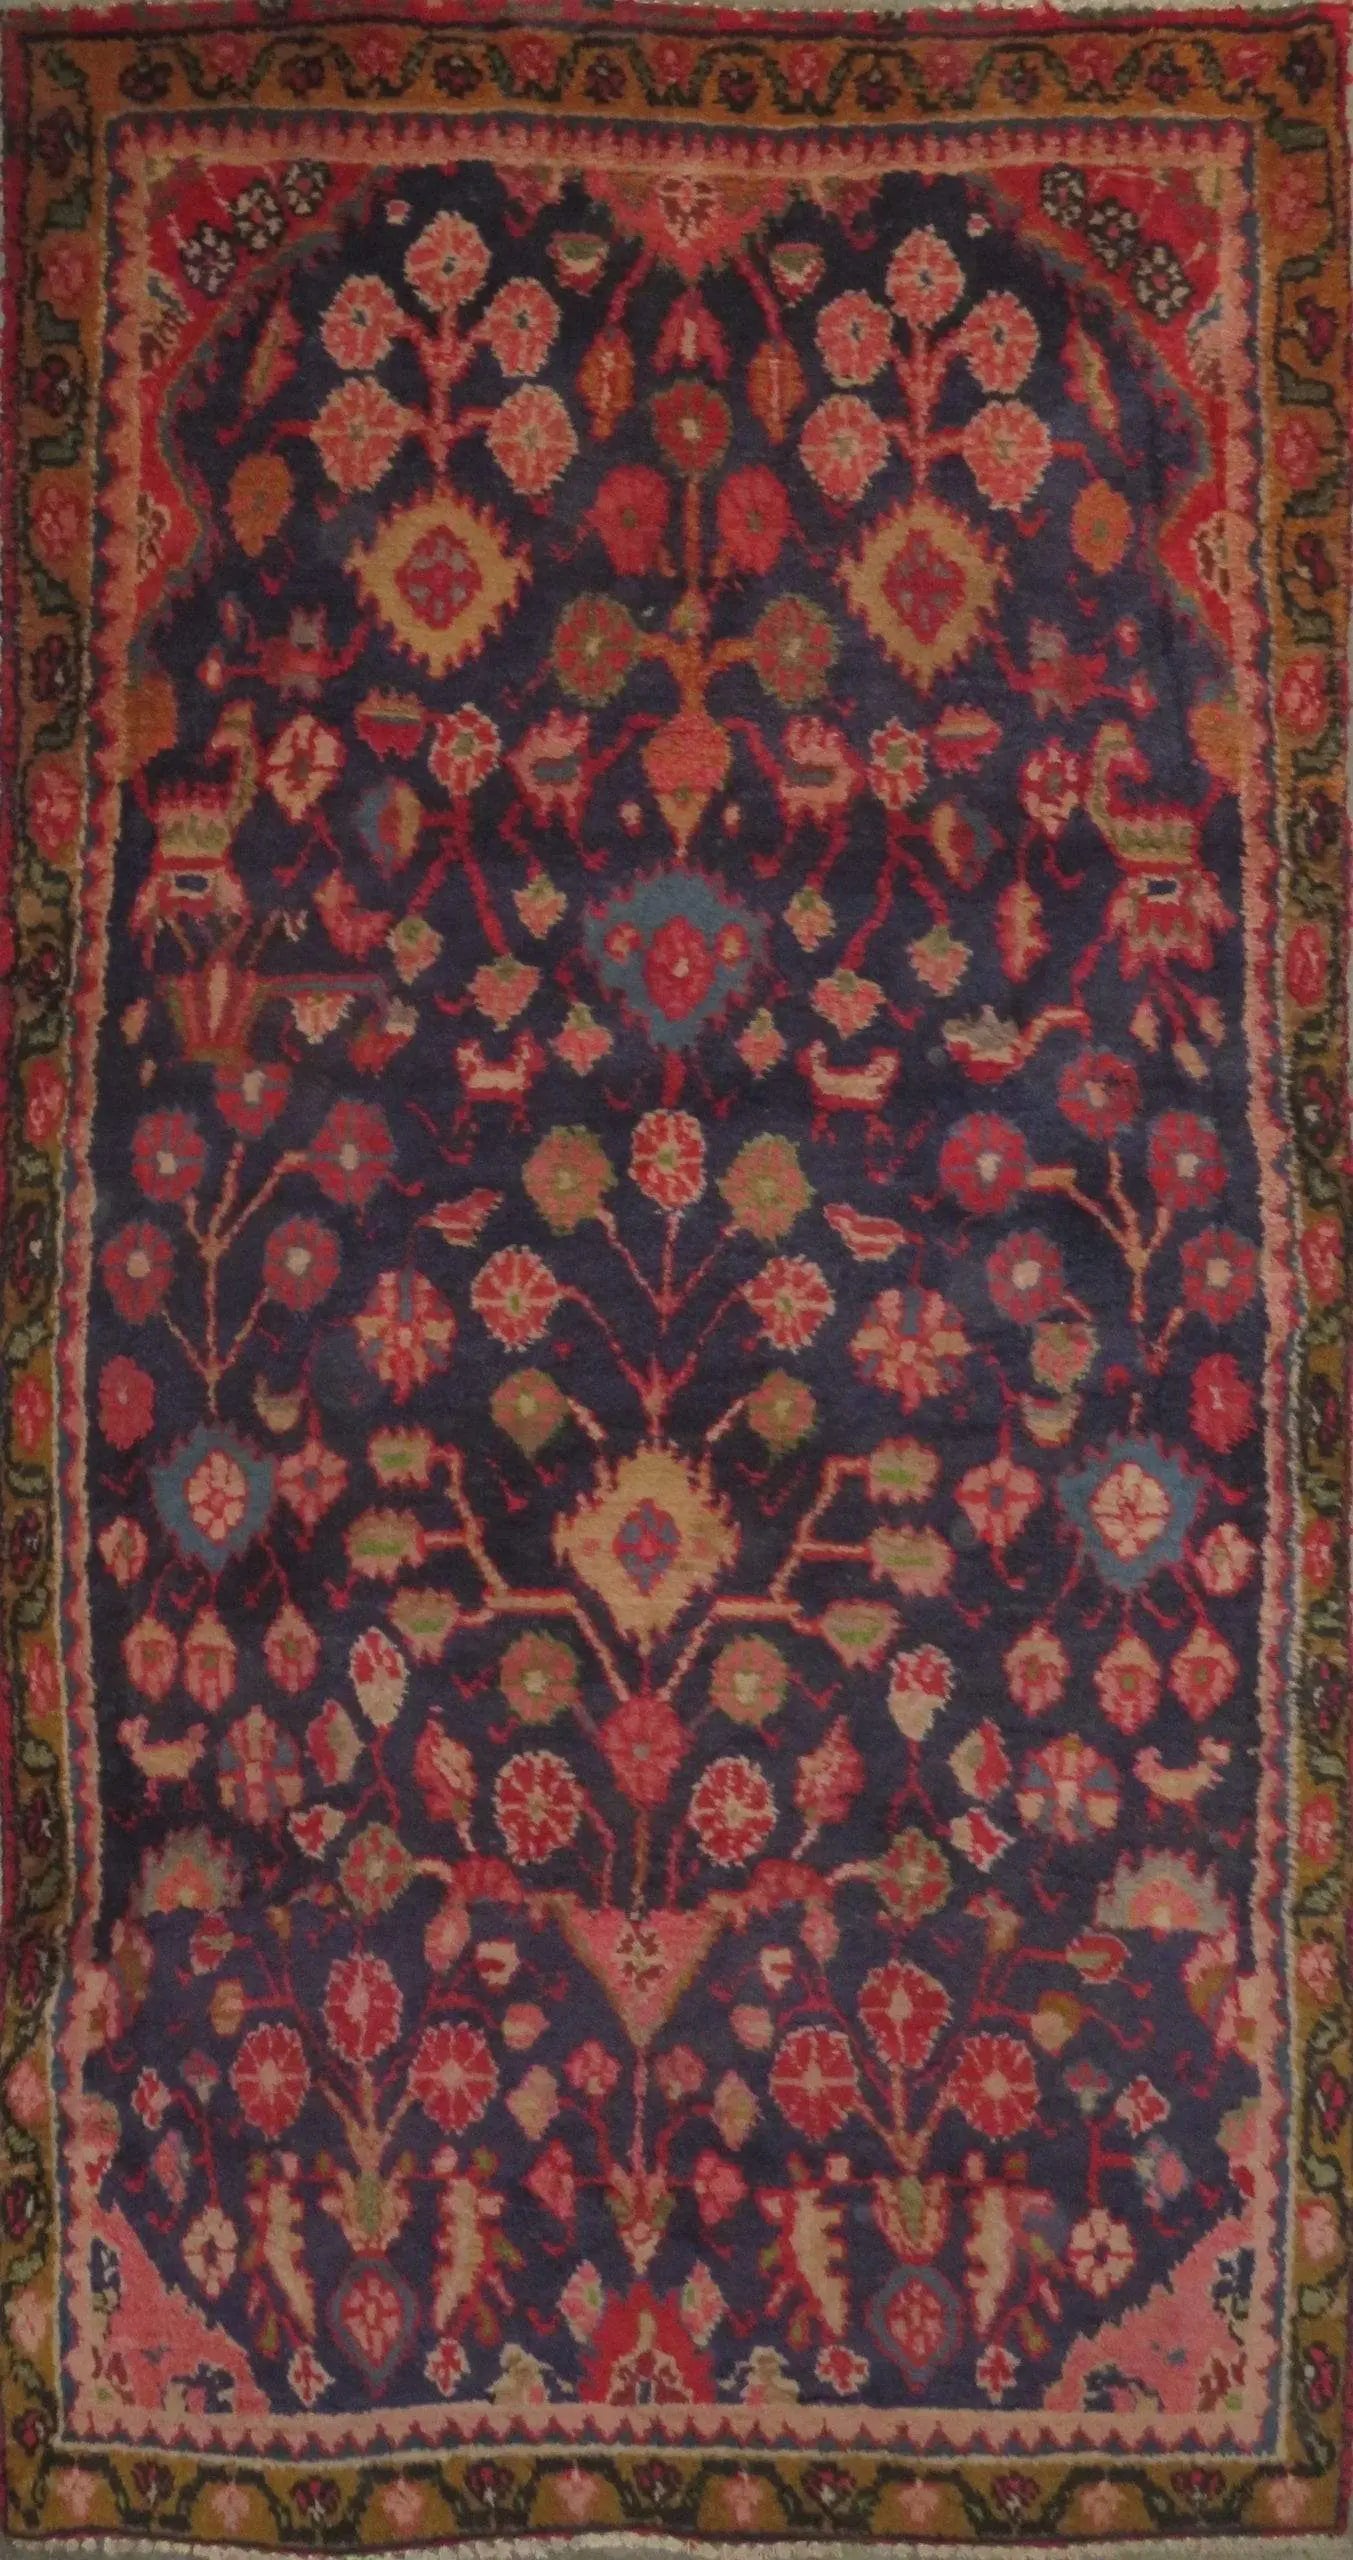 Hand-Knotted Persian Wool Rug _ Luxurious Vintage Design, 7'1" x 3'7", Artisan Crafted